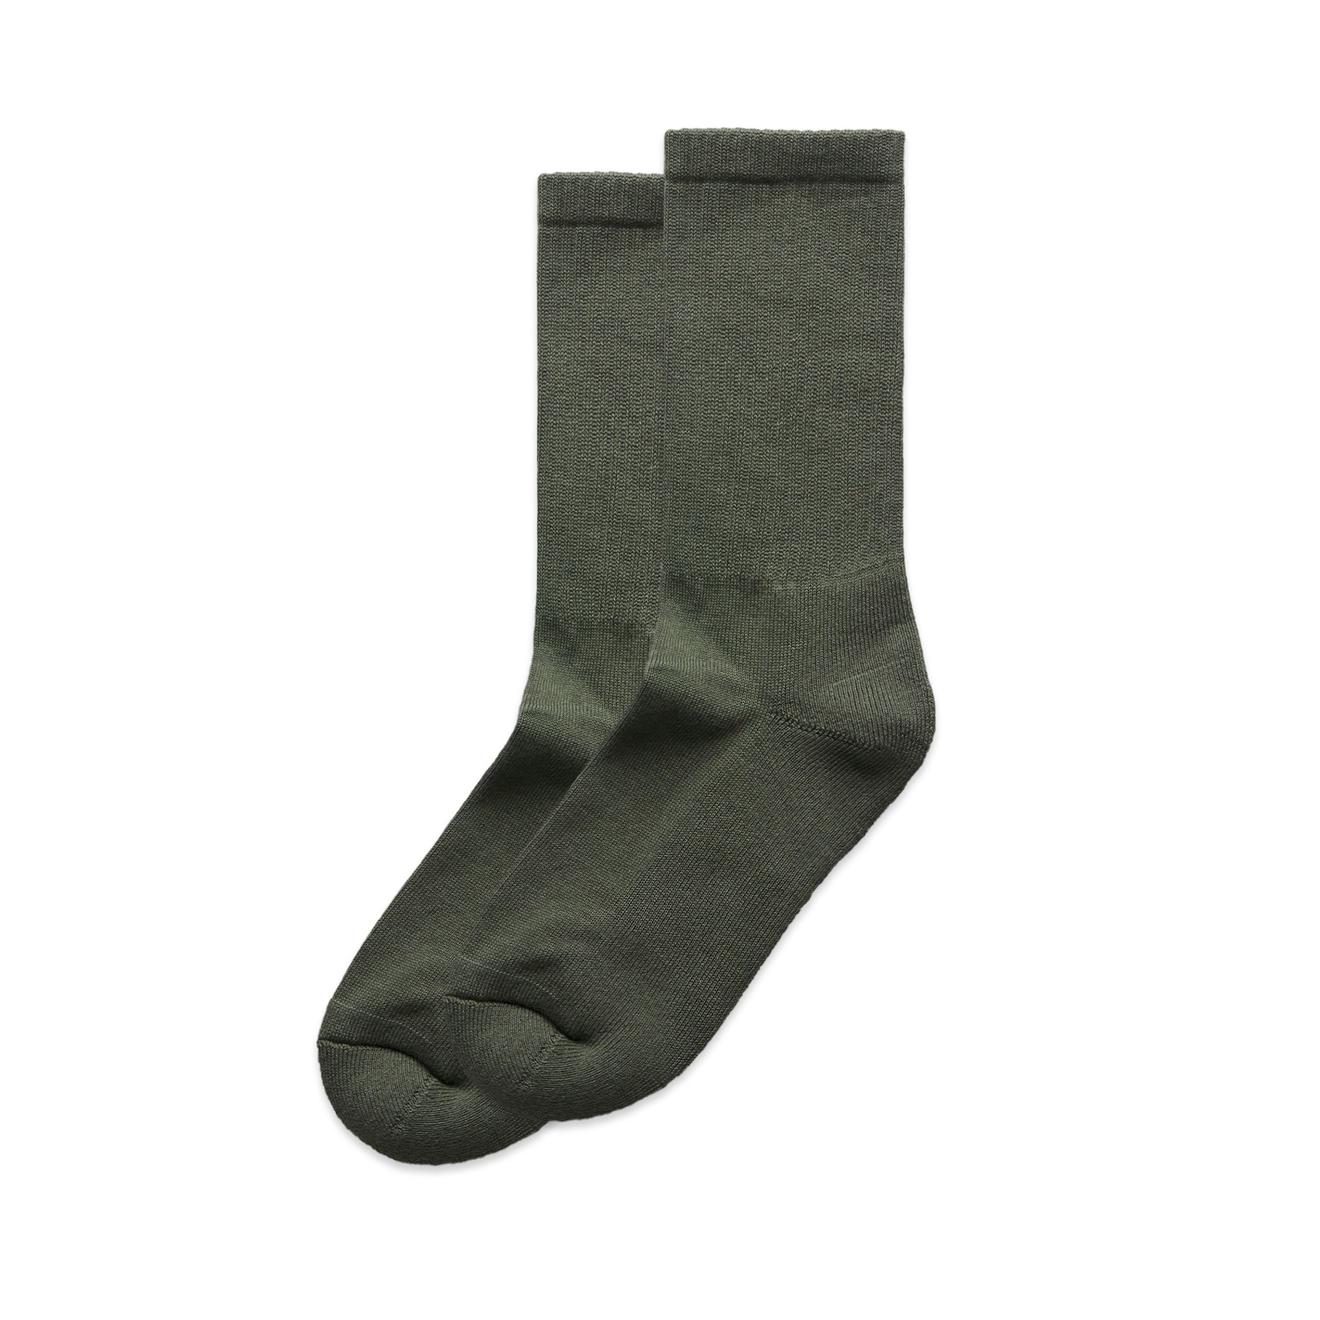 RELAX SOCKS (2 PAIRS) - 120 offers at $15 in AS Colour